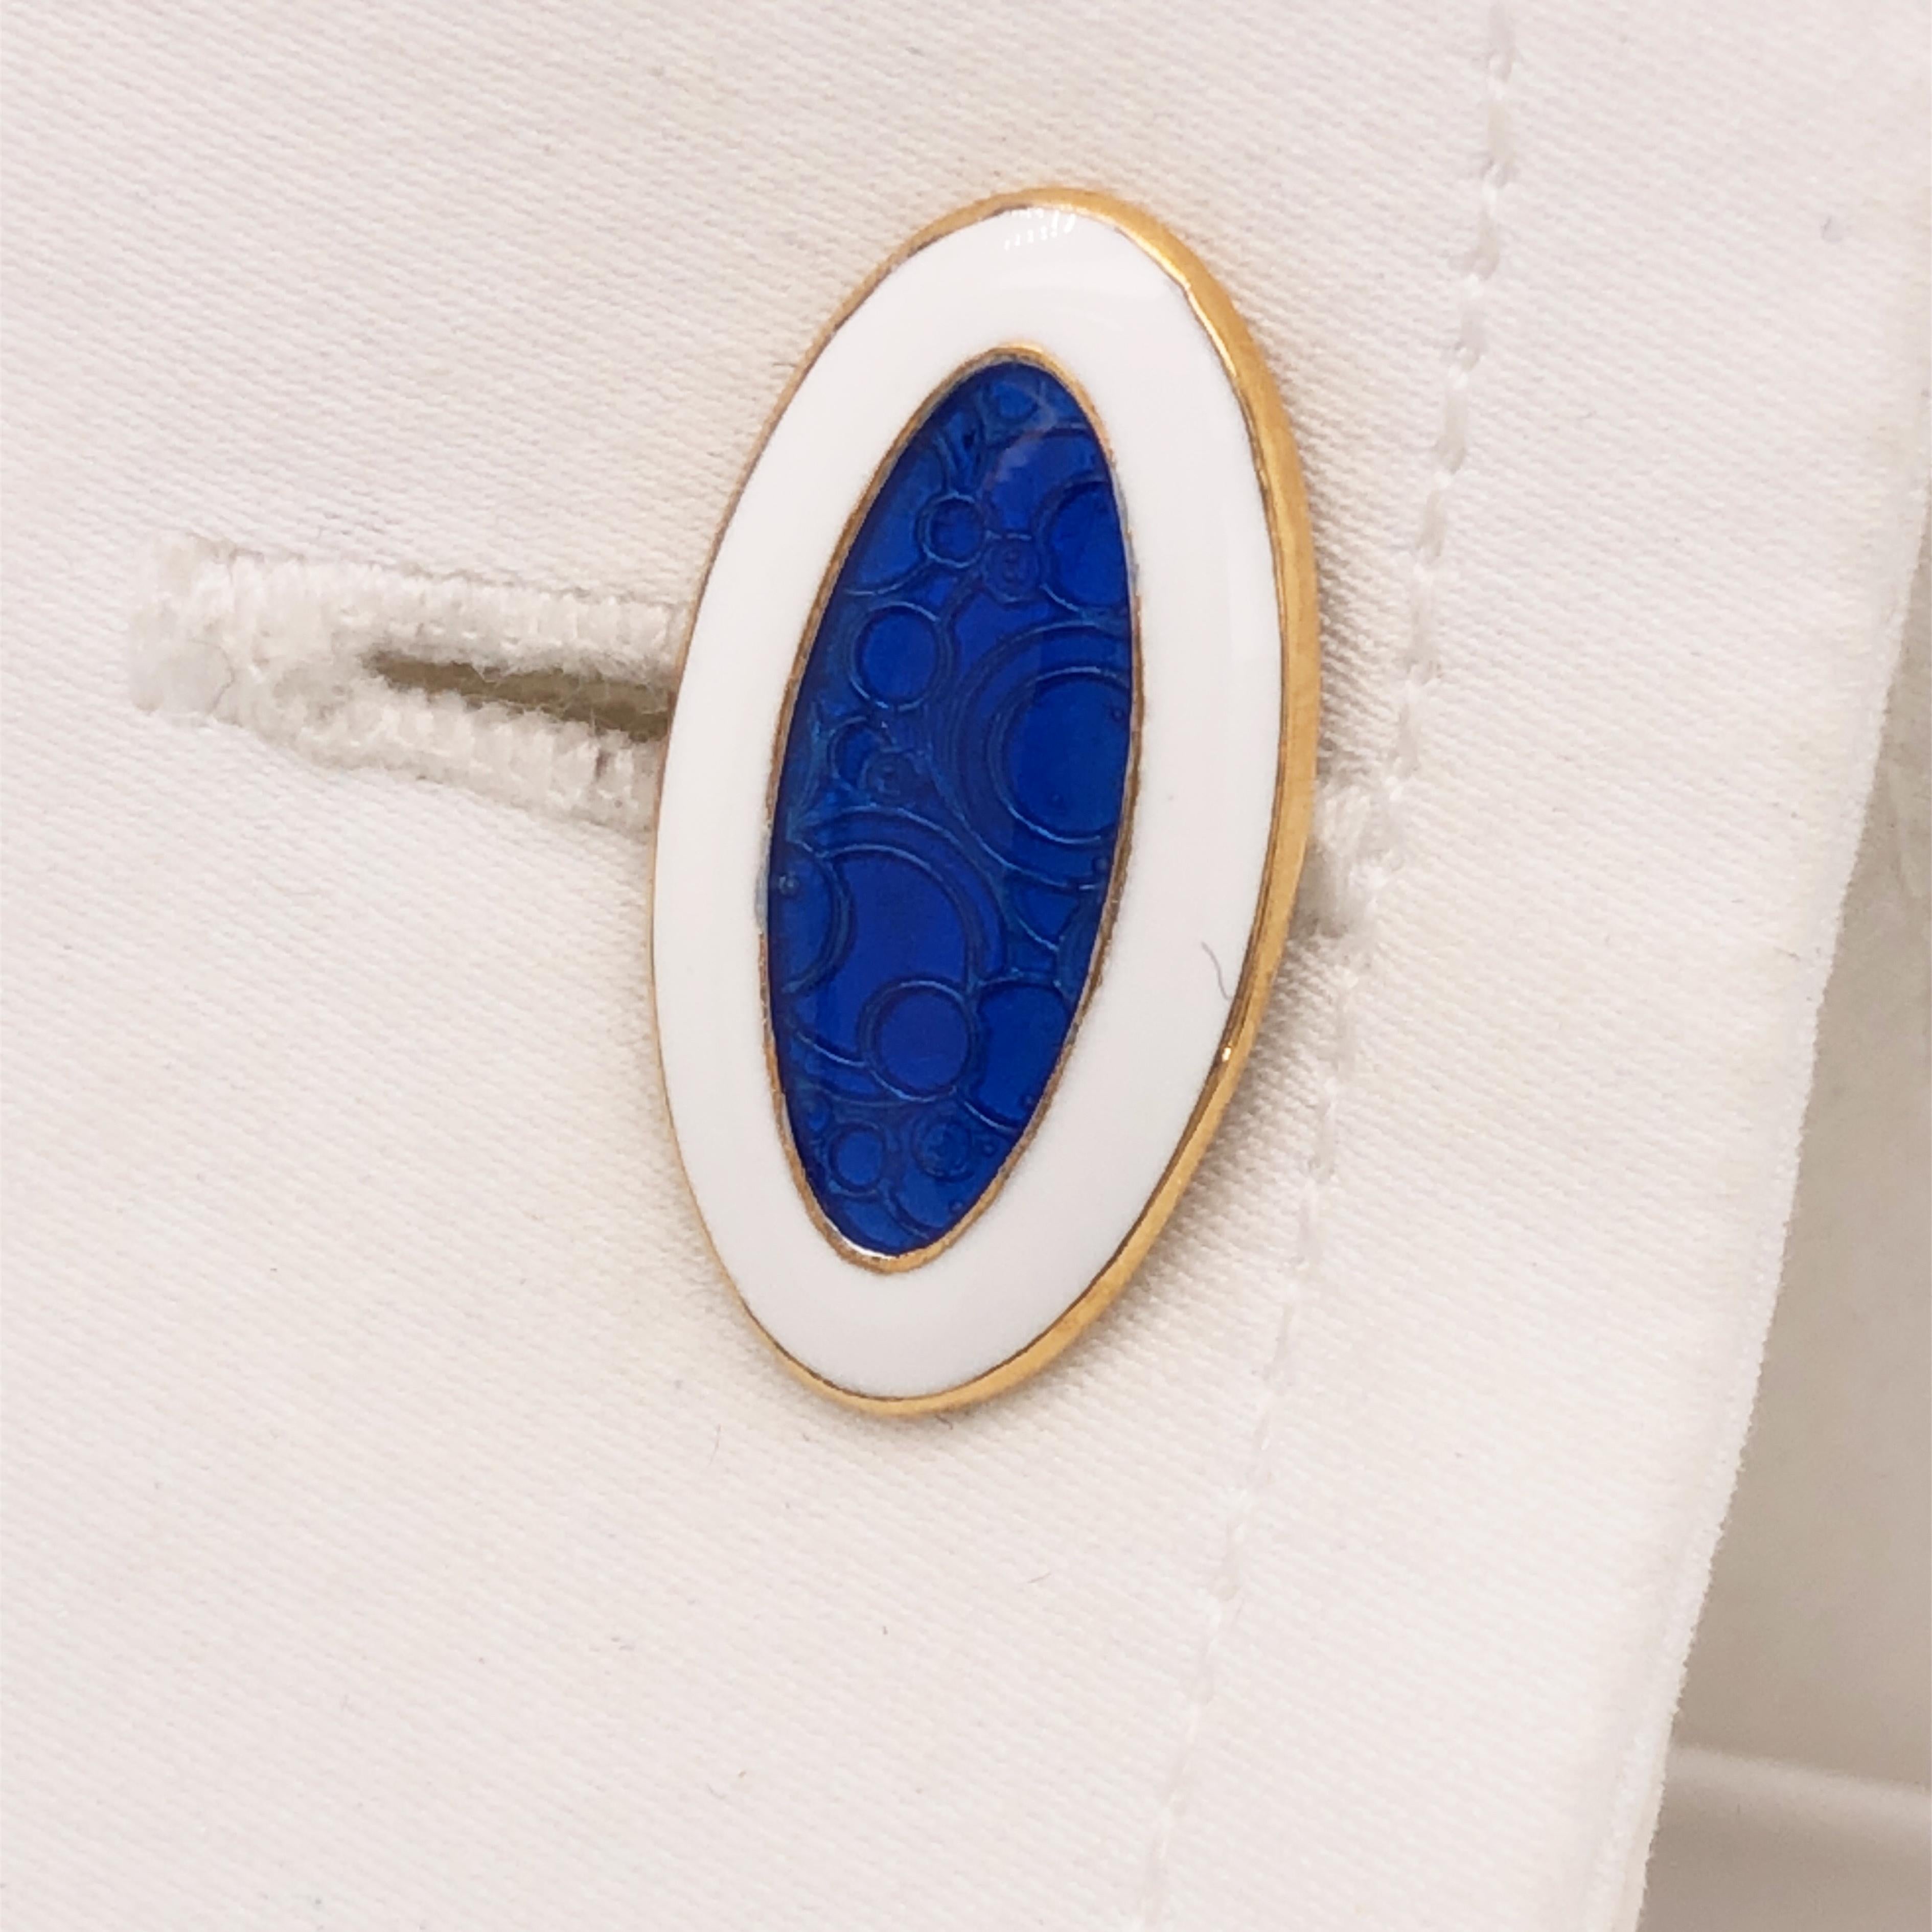 Berca Champlevé Hand Enameled White Royal Blue Gold Sterling Silver Cufflinks For Sale 2